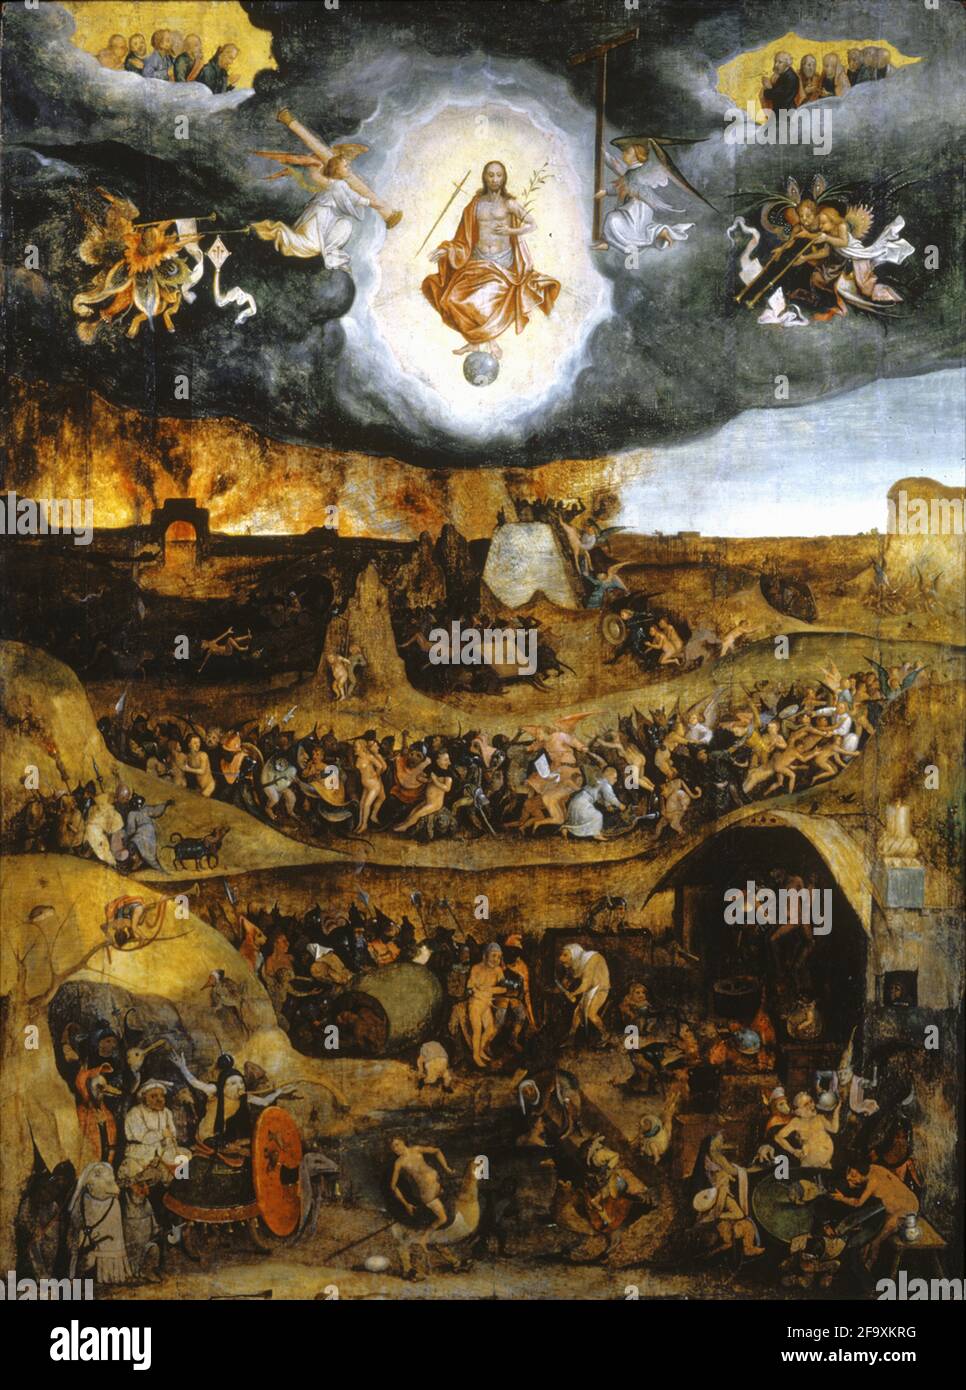 vintage art depicting heaven, hell and the last judgement Stock Photo